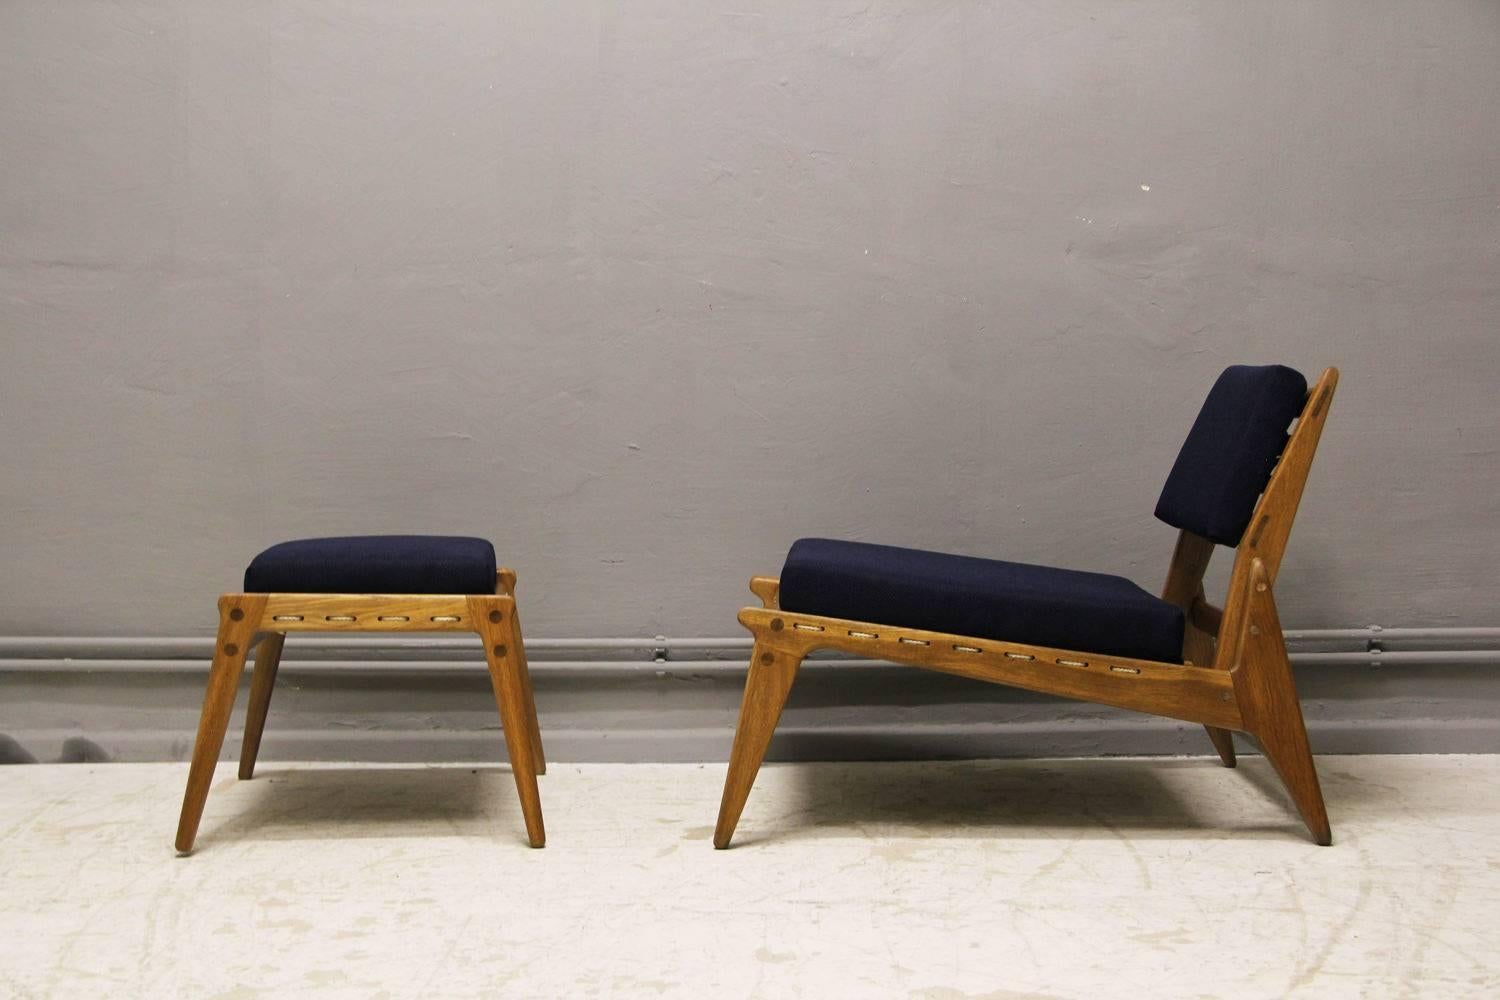 Rare Mid-Century Hunting Chair with Ottoman in Oak and Textile, Germany, 1950s For Sale 5